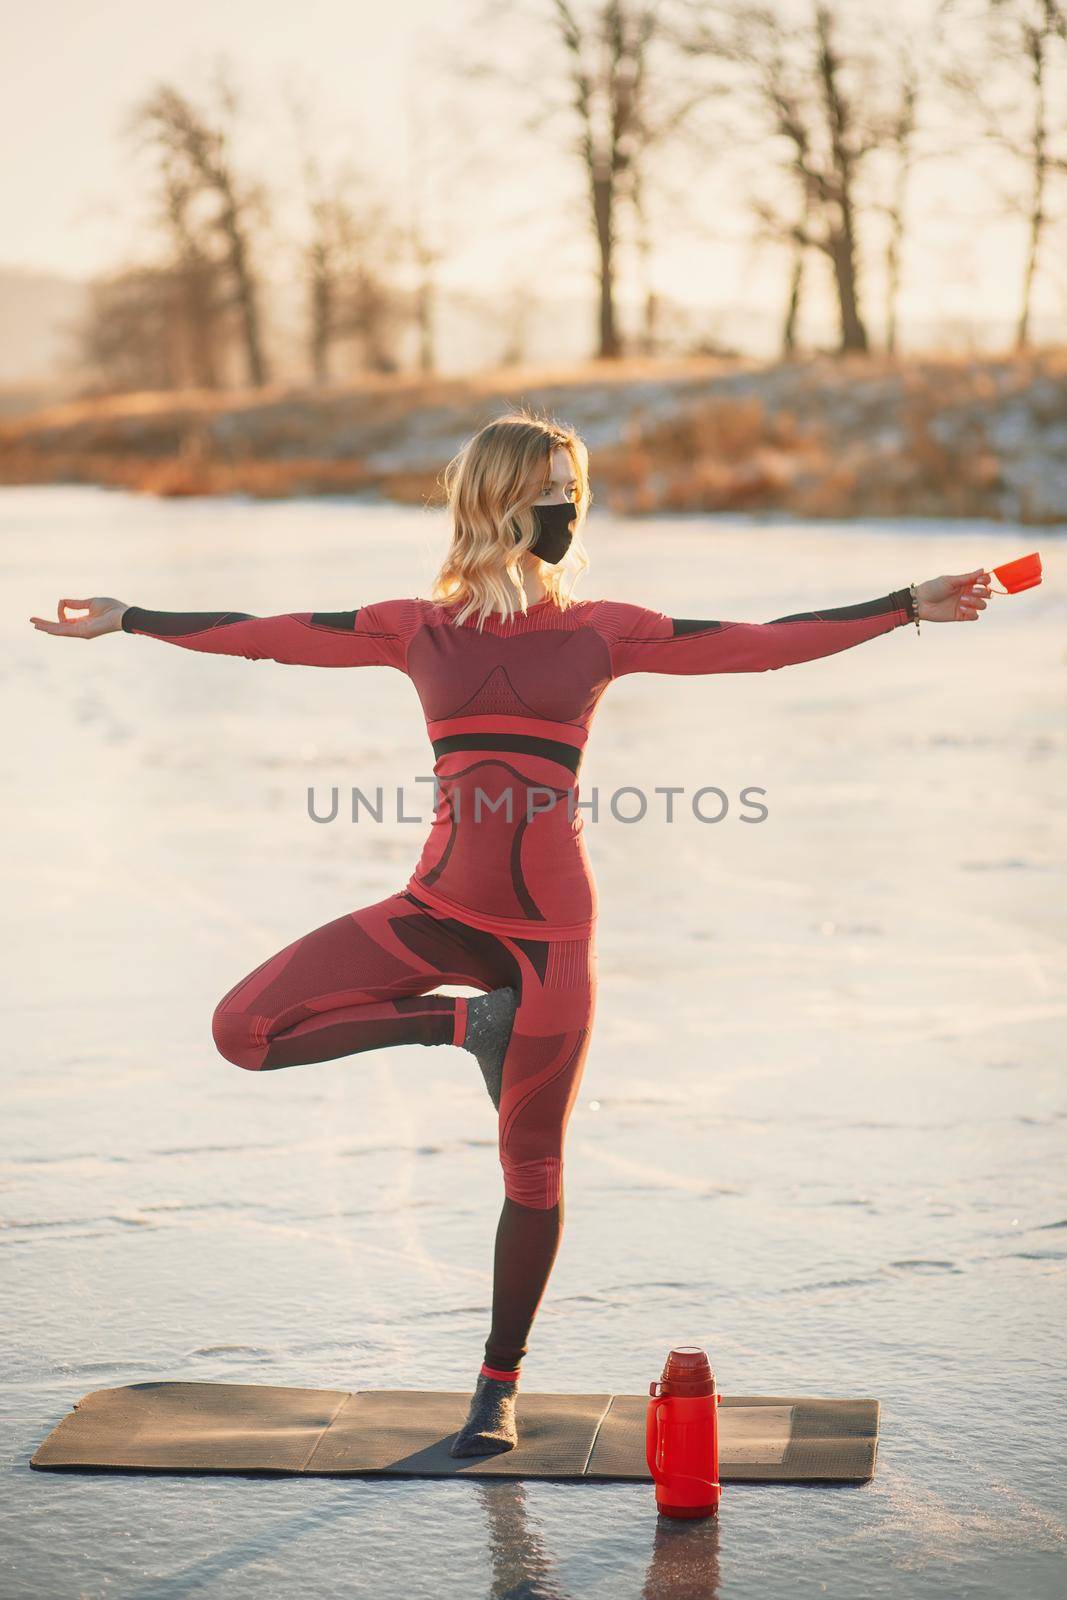 A girl does yoga in winter on the ice of the lake